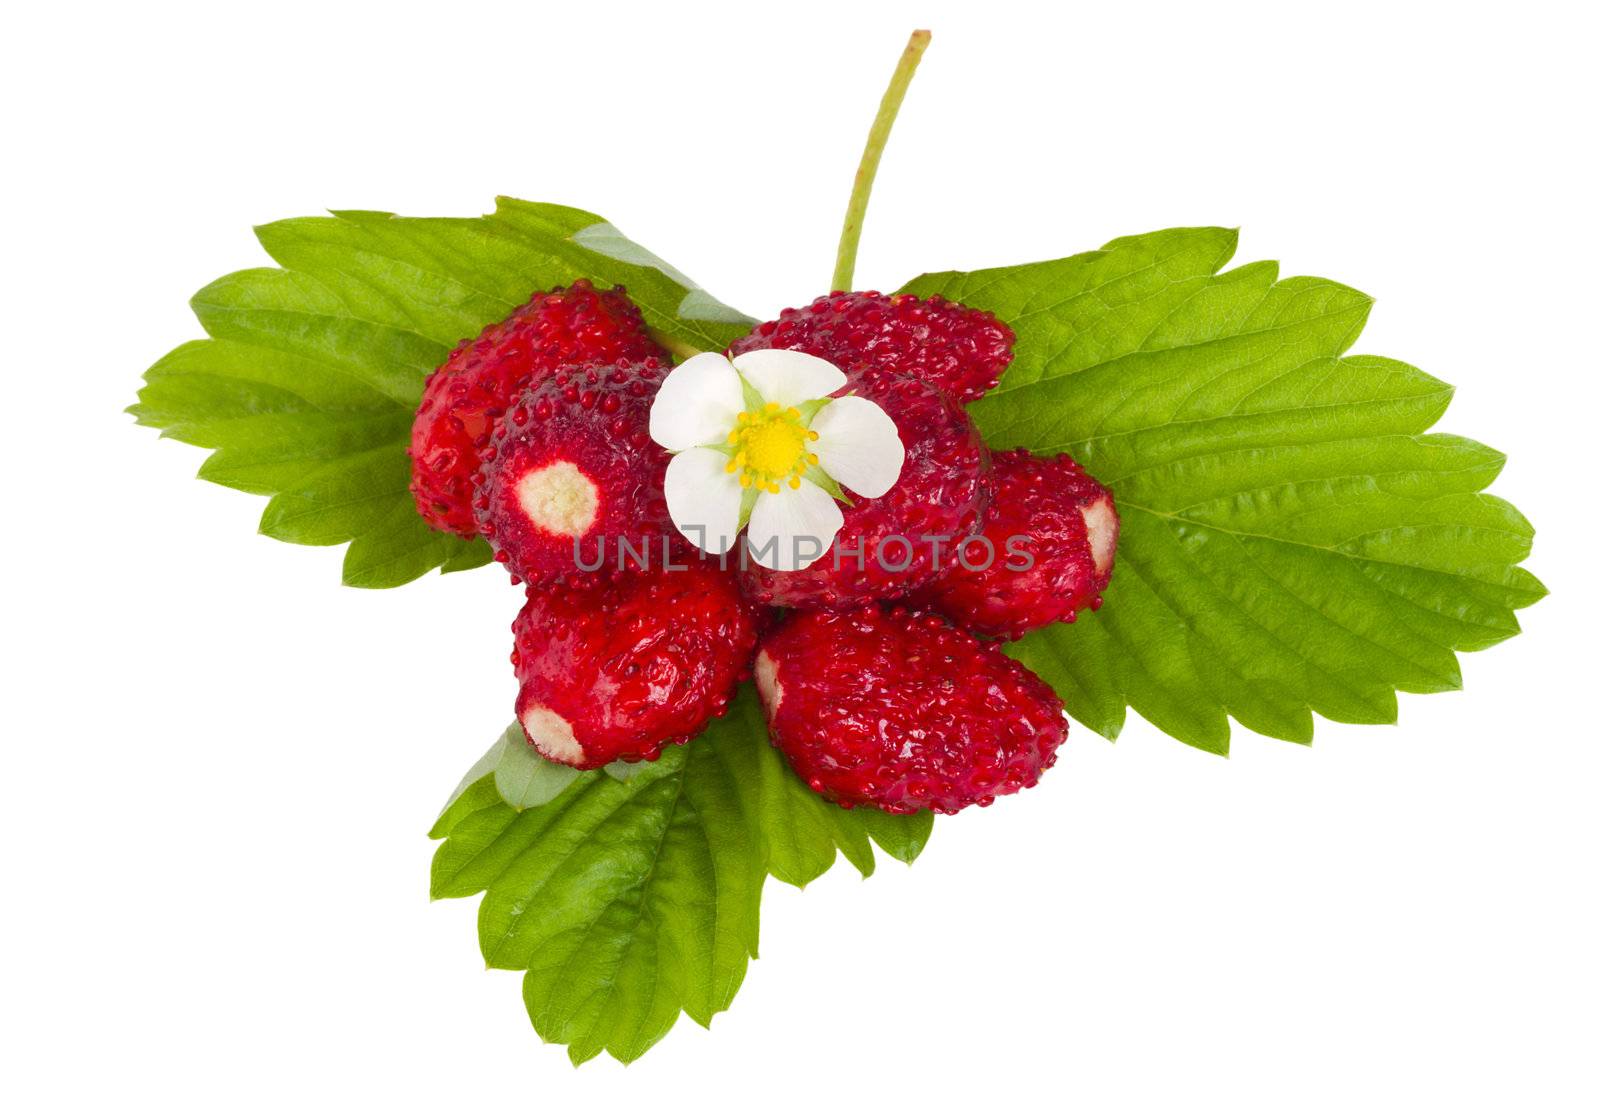 wild strawberries with flower and leaves by Alekcey